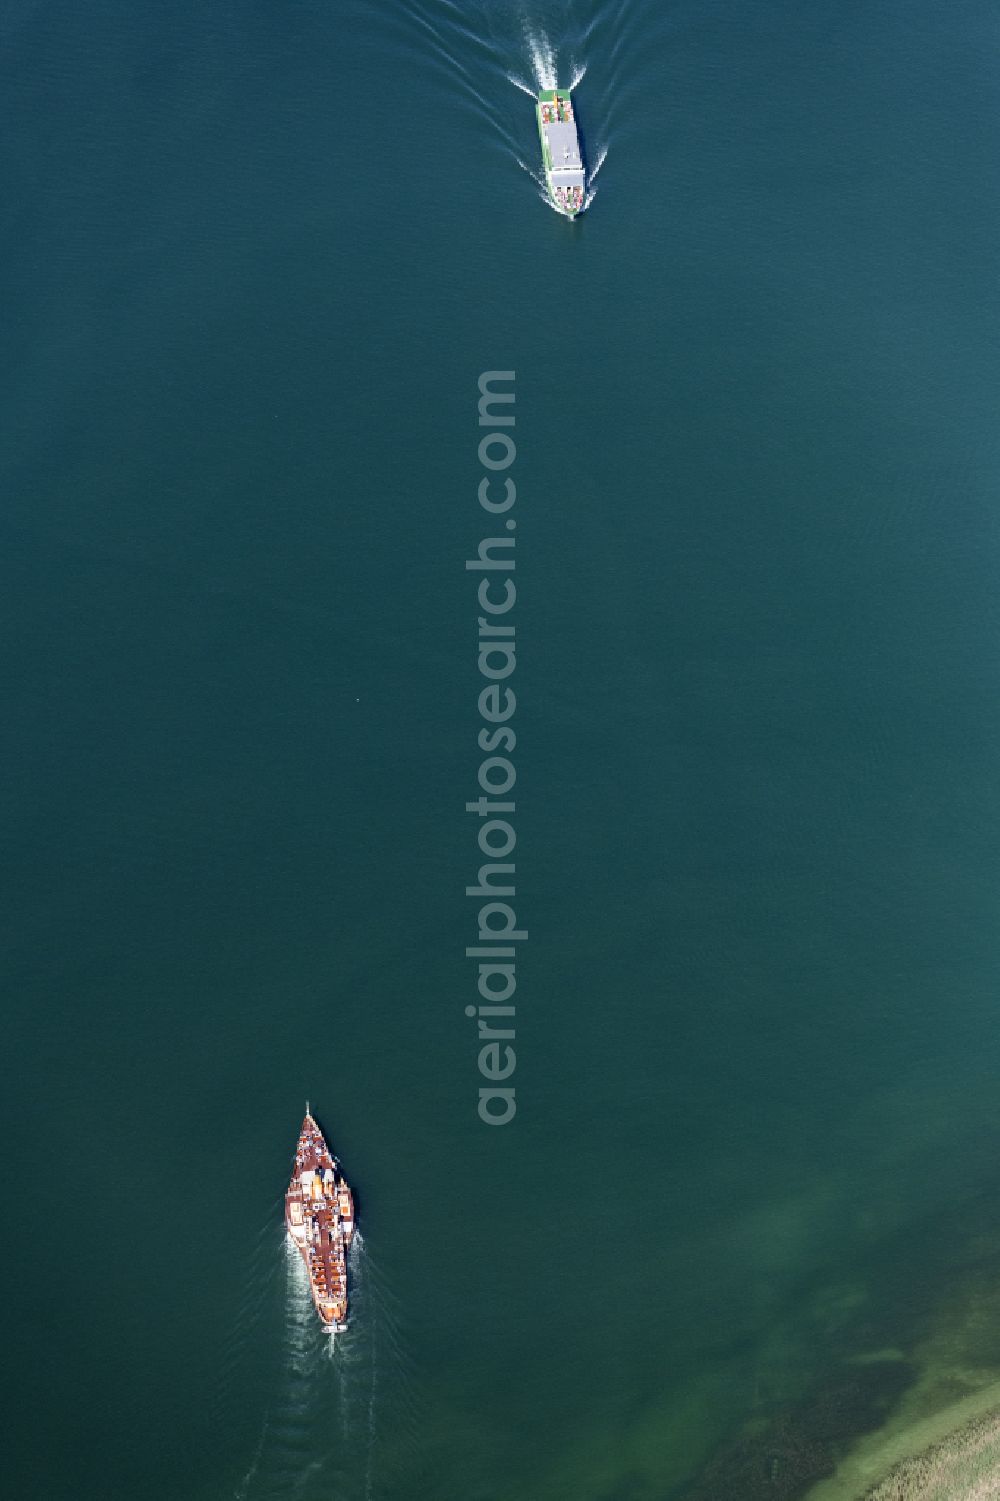 Aerial image Chiemsee - Passenger ship Raddampfer Ludwig Fessler in Chiemsee in the state Bavaria, Germany